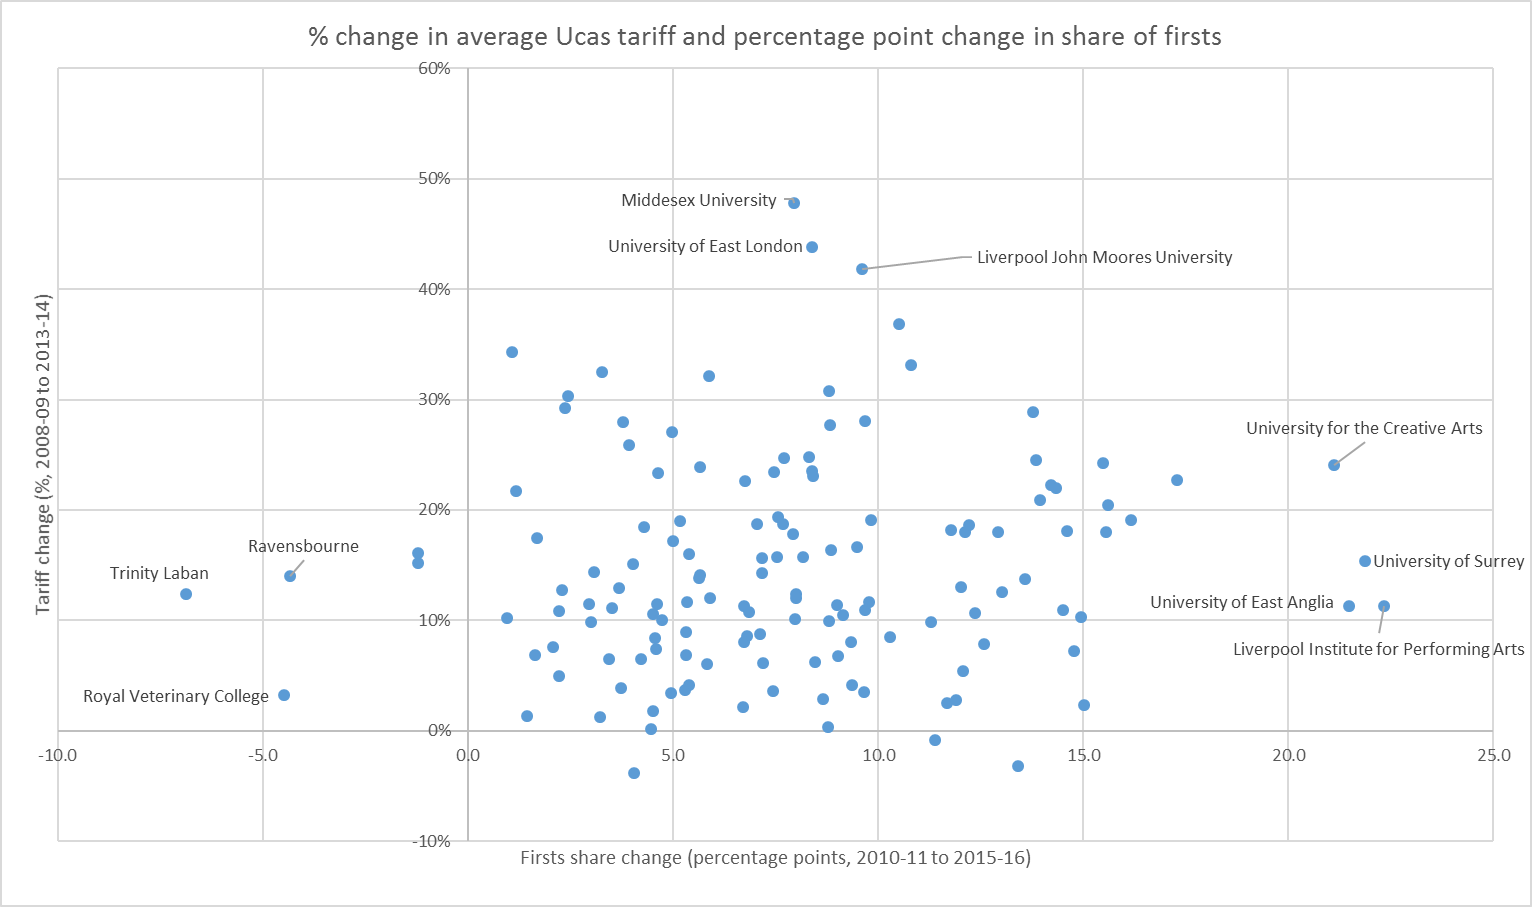 % change in average Ucas tariff and percentage point change in share of firsts